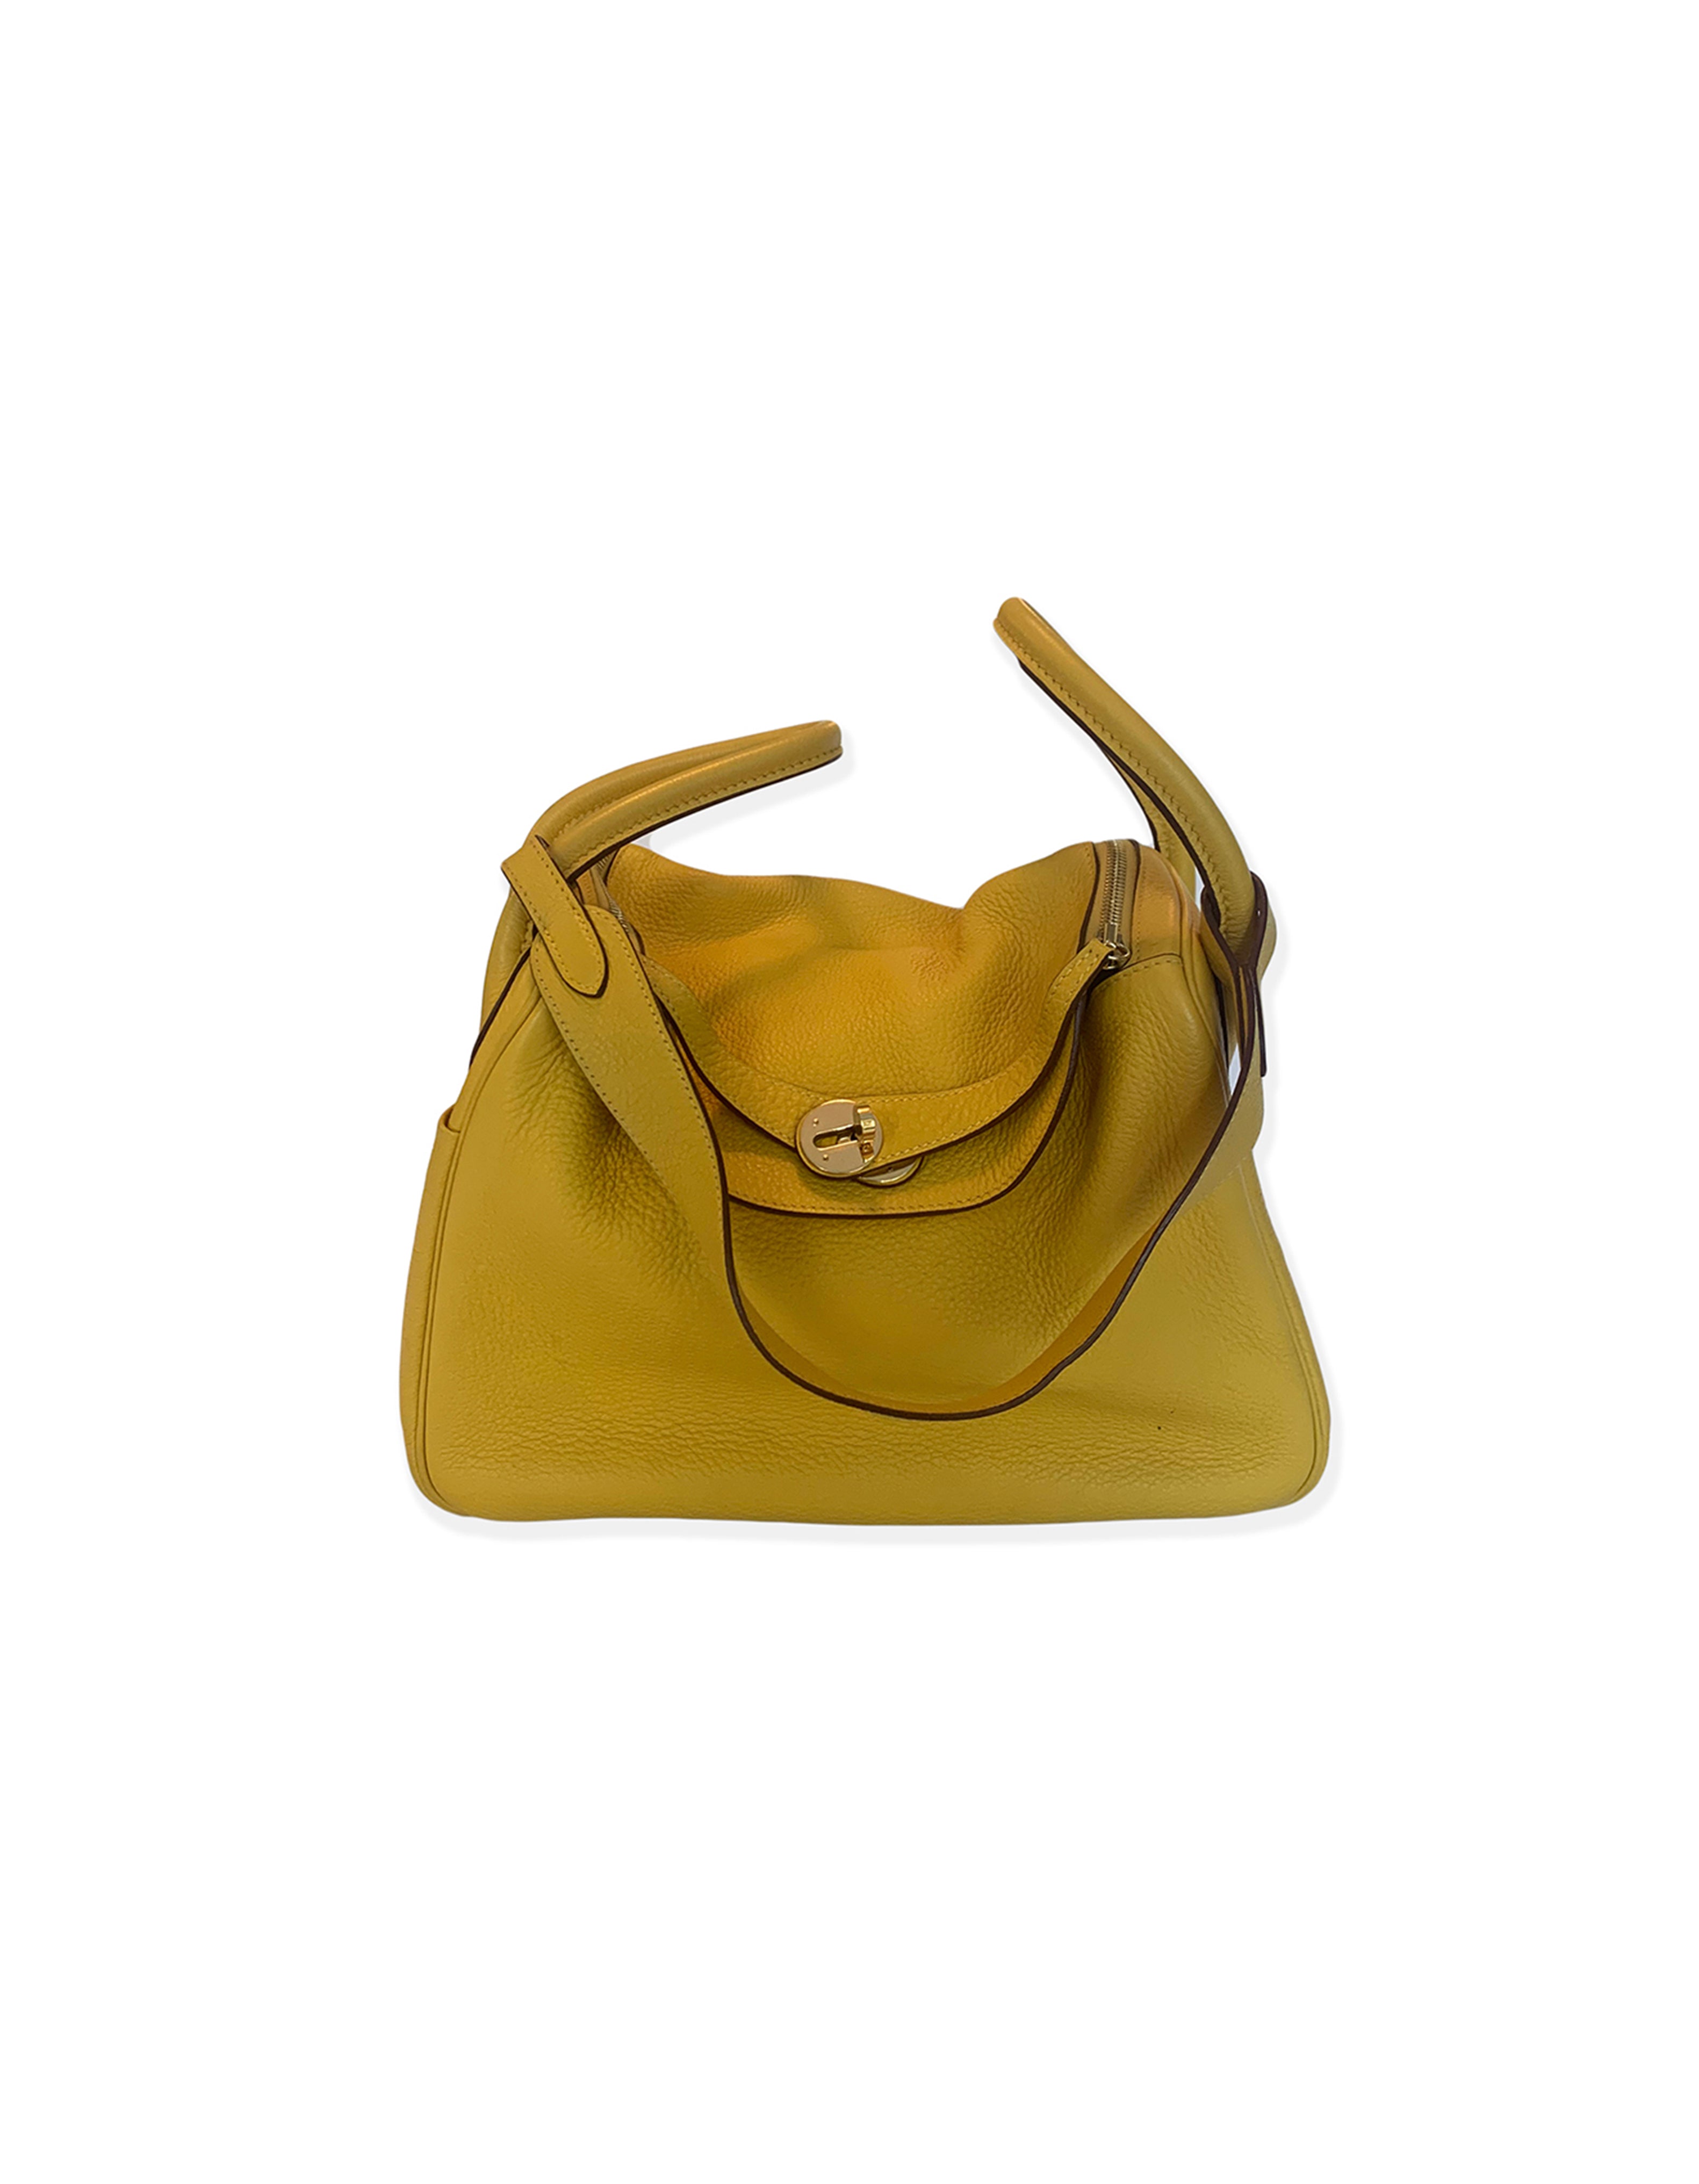 Hermes Yellow Clemence Leather Lindy 30 Bag